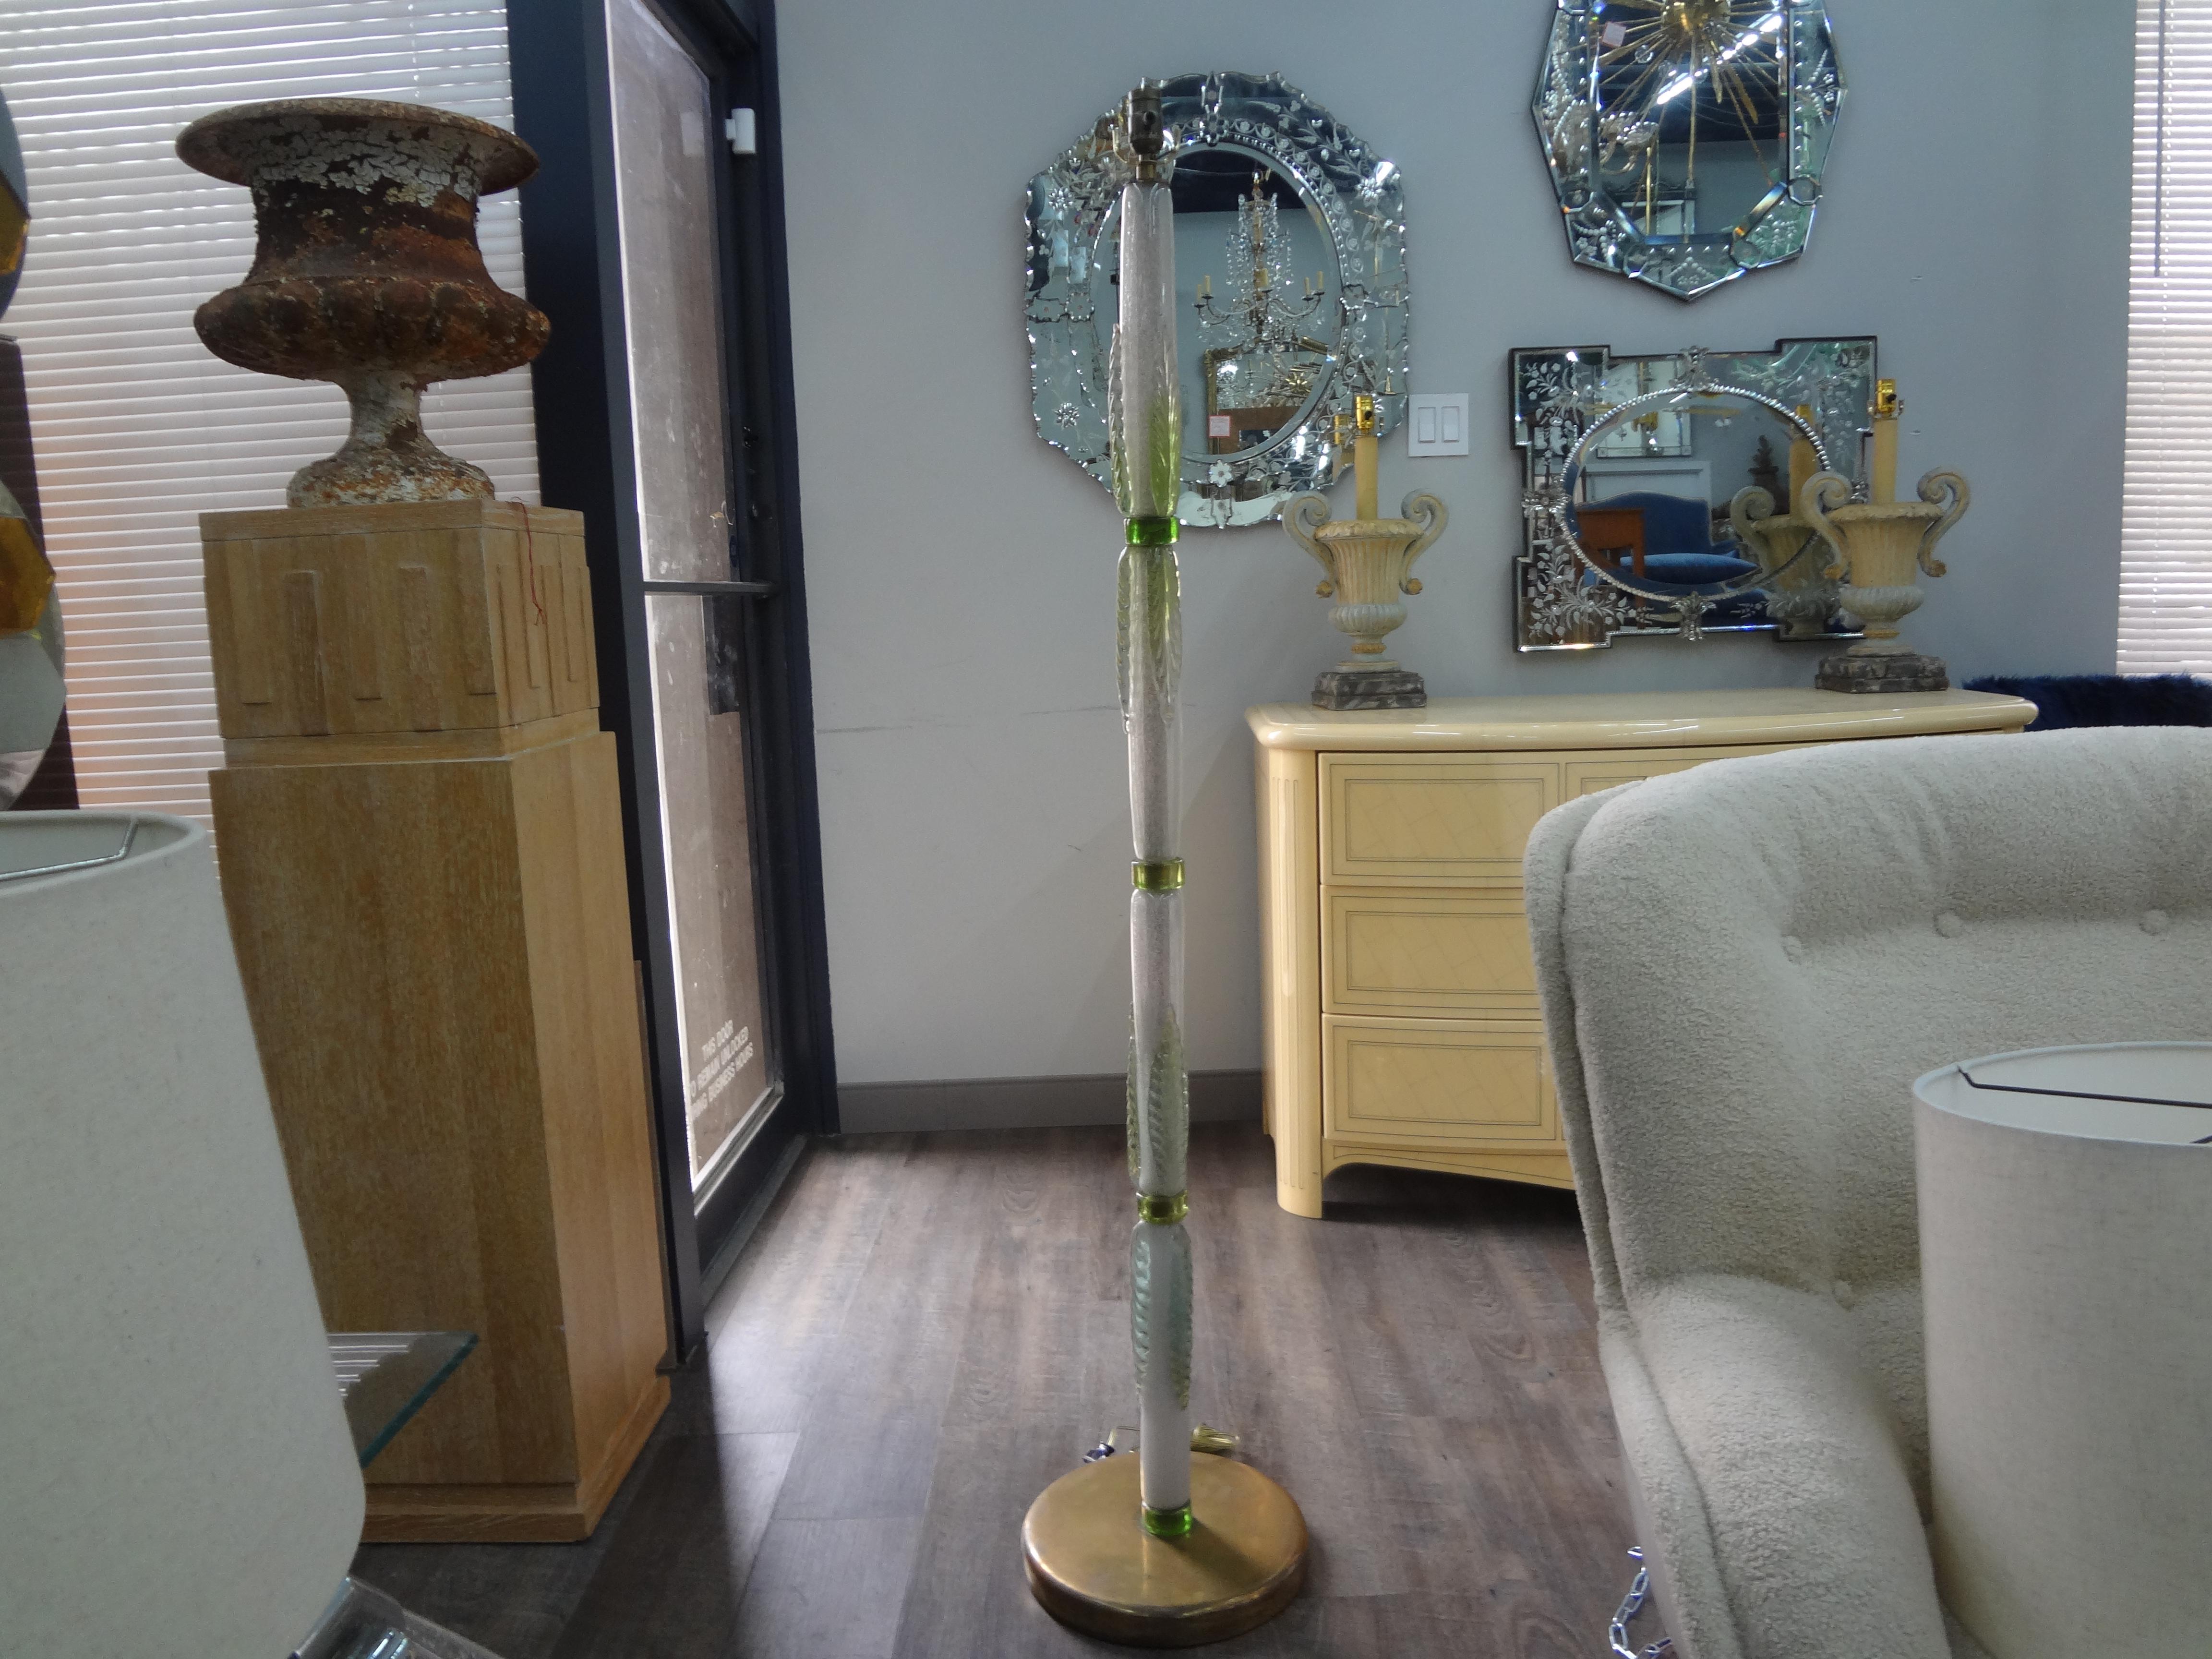 Mid Century Murano Glass Floor Lamp.
Lovely mid century modern floor lamp in shades of greens and white hand blown Murano glass mounted on a brass base. This unusual floor lamp has been newly wired for the U.S. market.
Stunning!